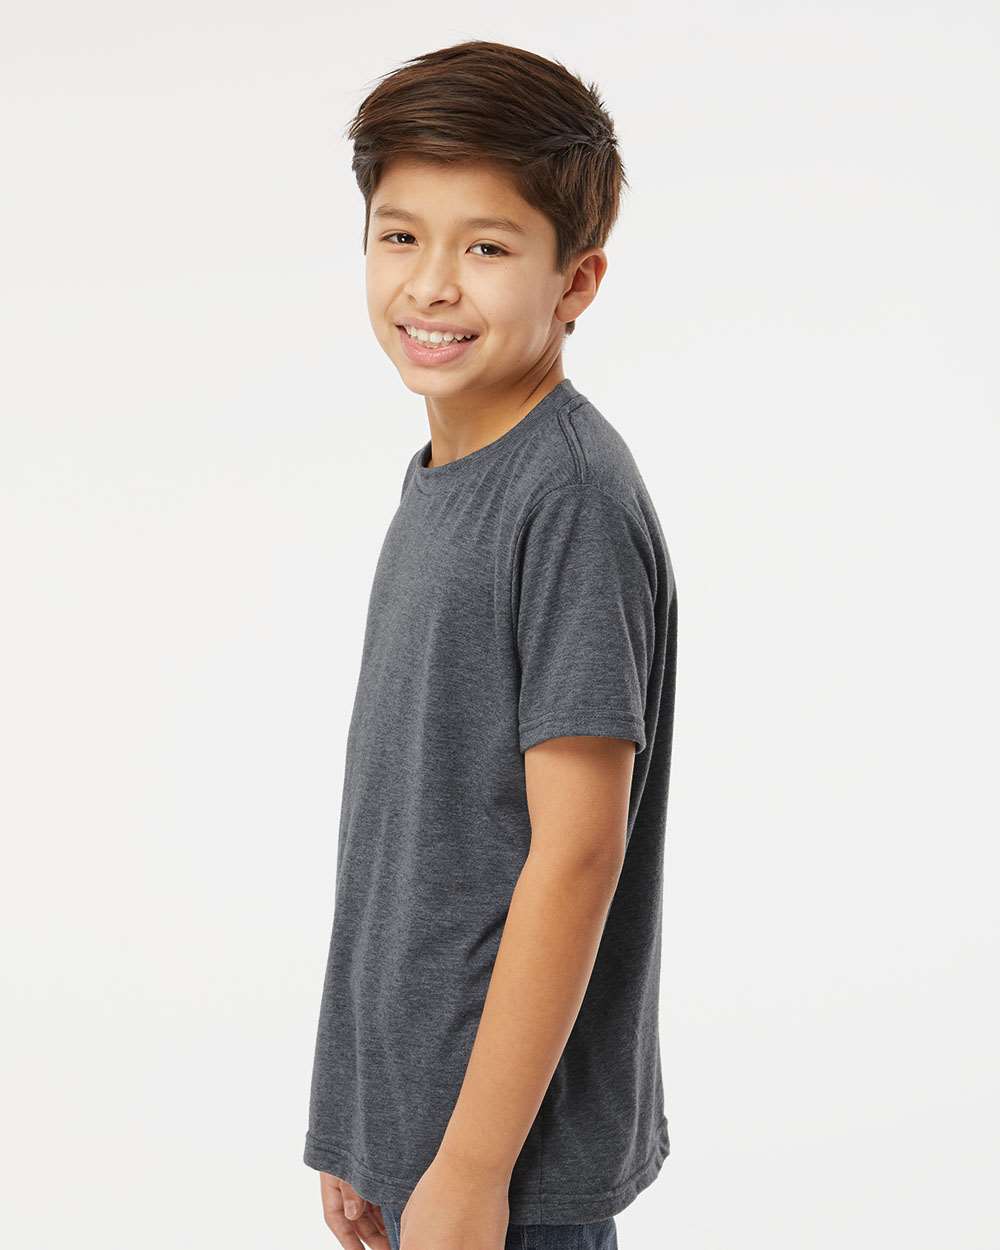 M&O Youth Deluxe Blend T-Shirt 3544 #colormdl_Heather Charcoal